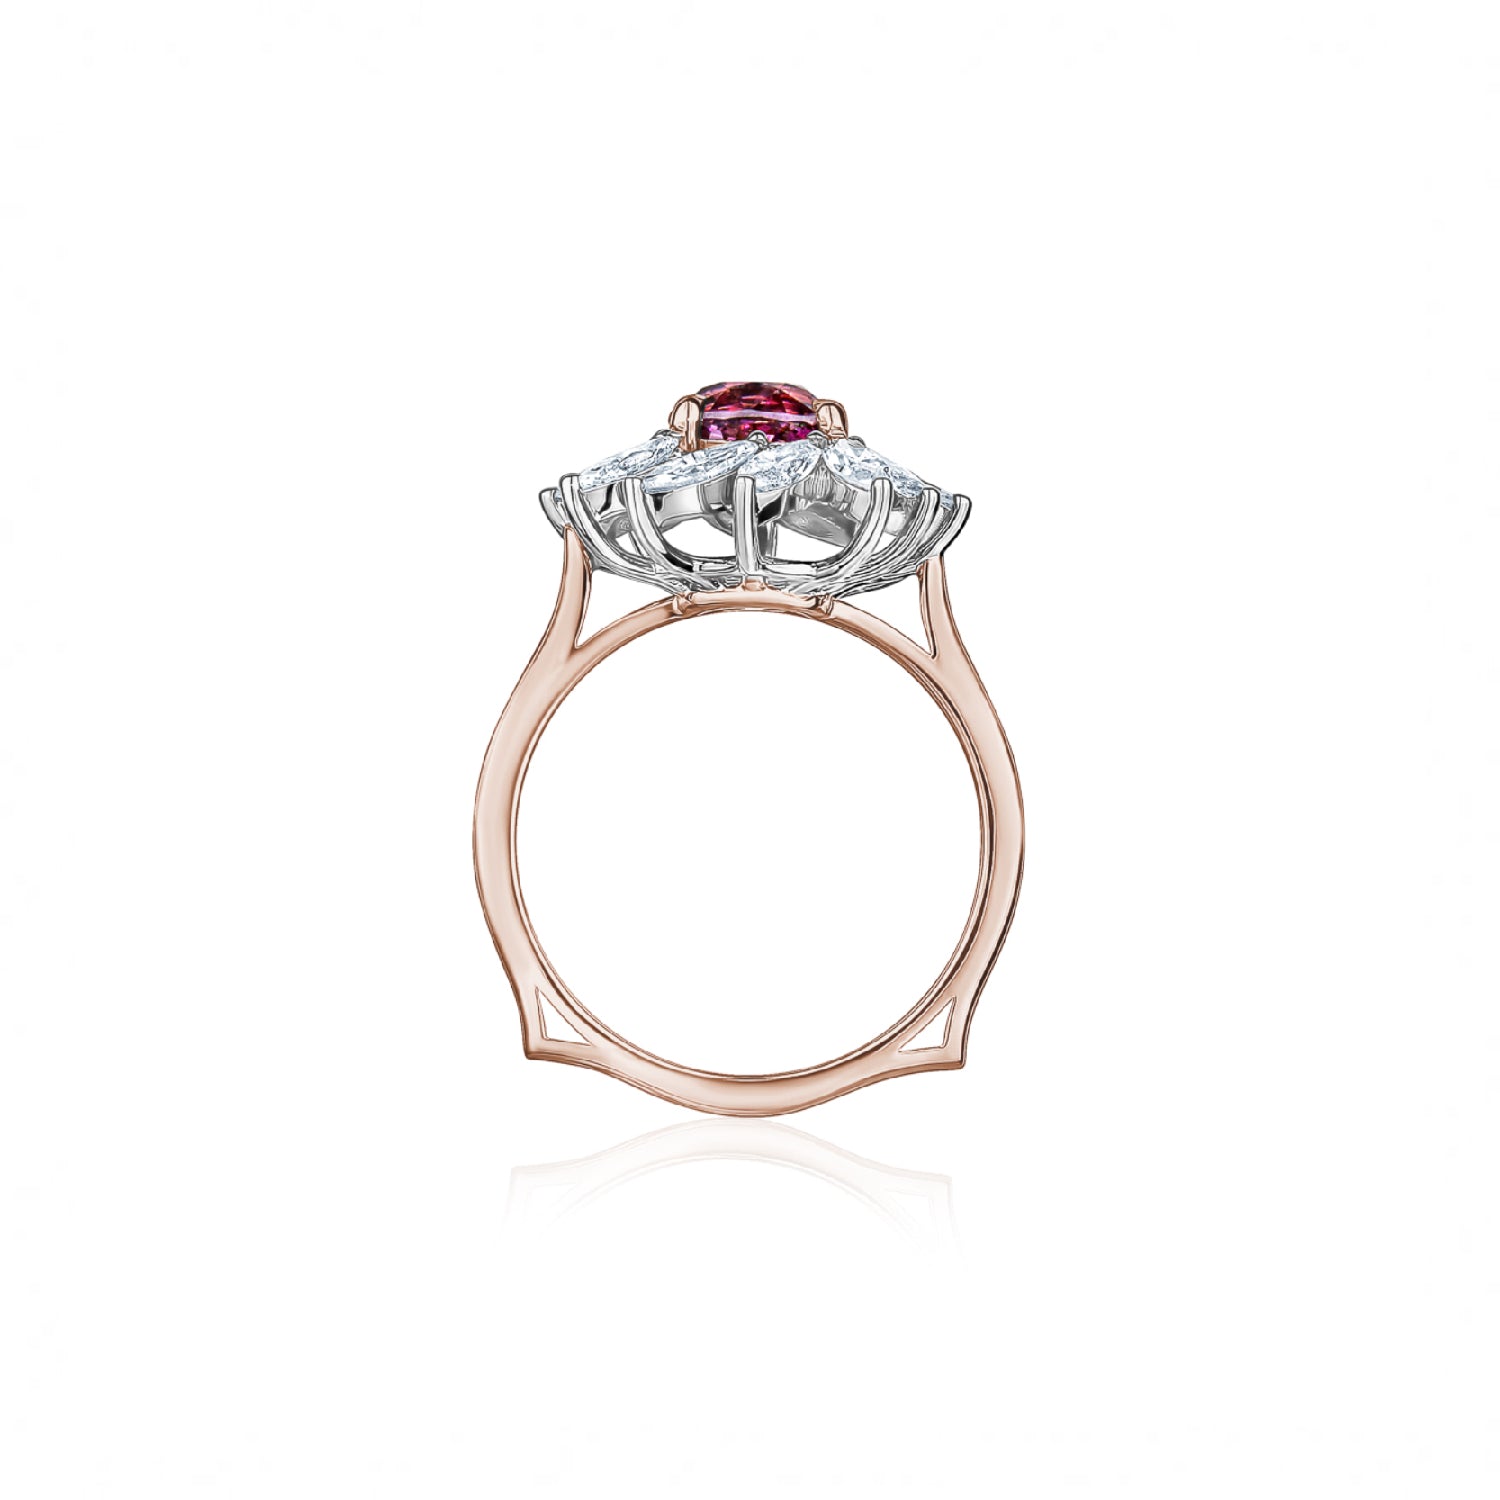 Cushion Cut Pink Spinel and Marquise Cut Diamond Engagement Ring in White and Rose Gold